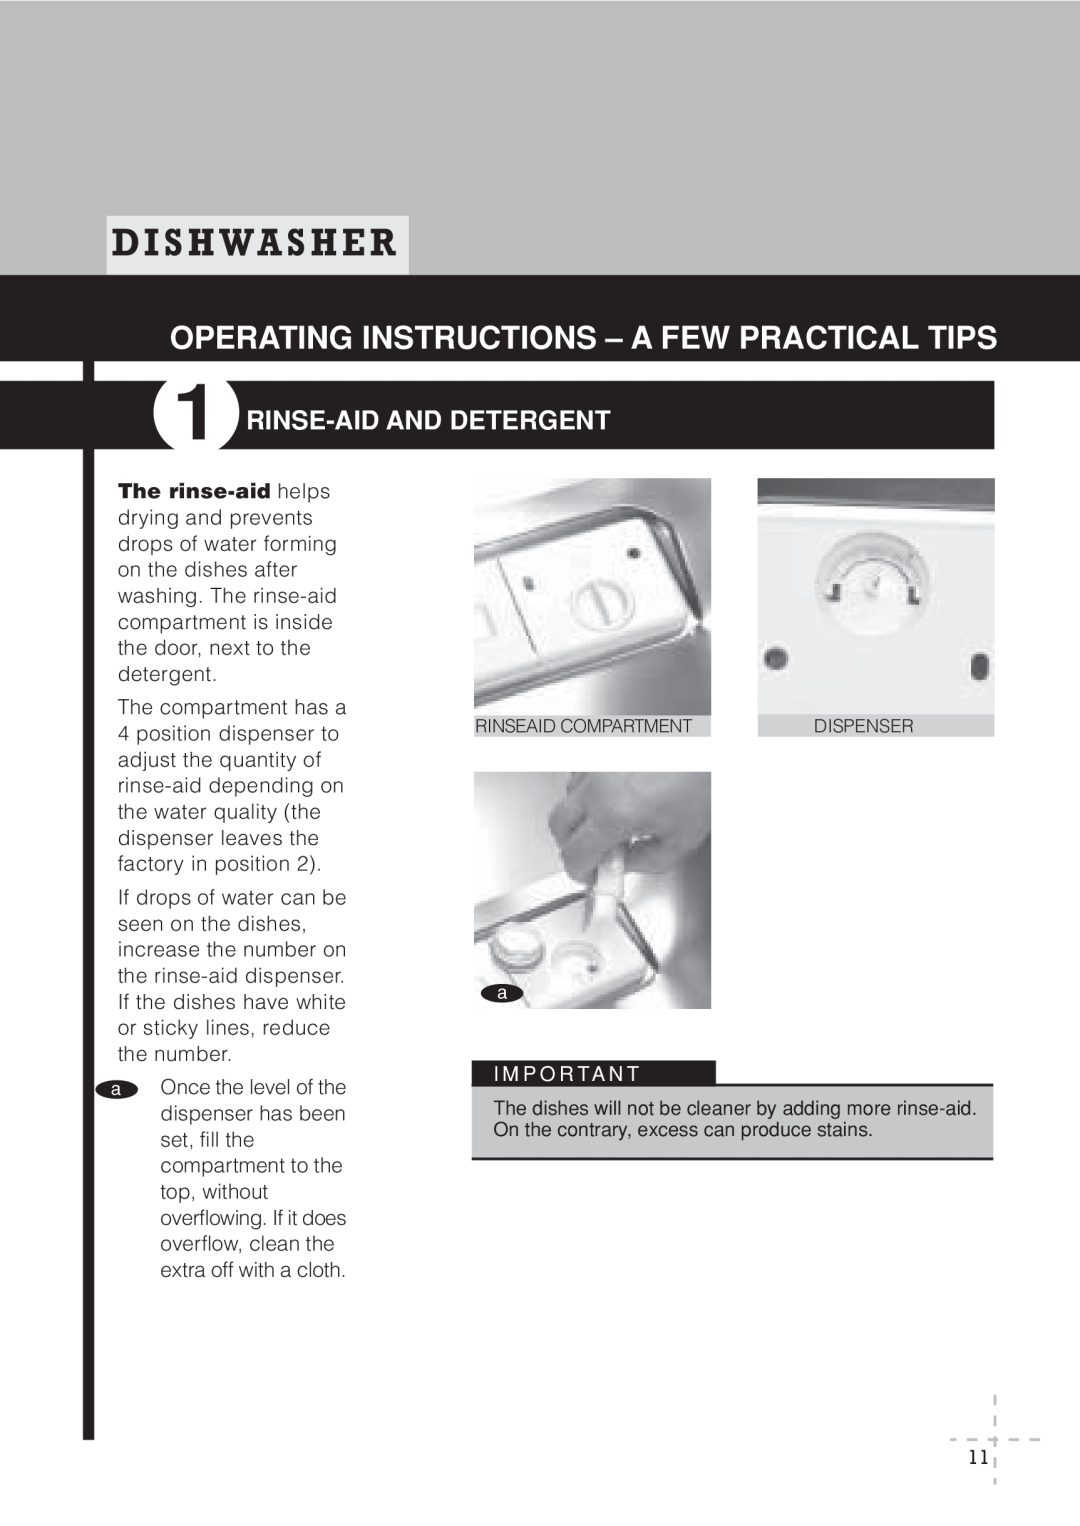 Fagor America IX LFA-013 SS D I S H W A S H E R, Operating Instructions - A Few Practical Tips, Rinse-Aid And Detergent 